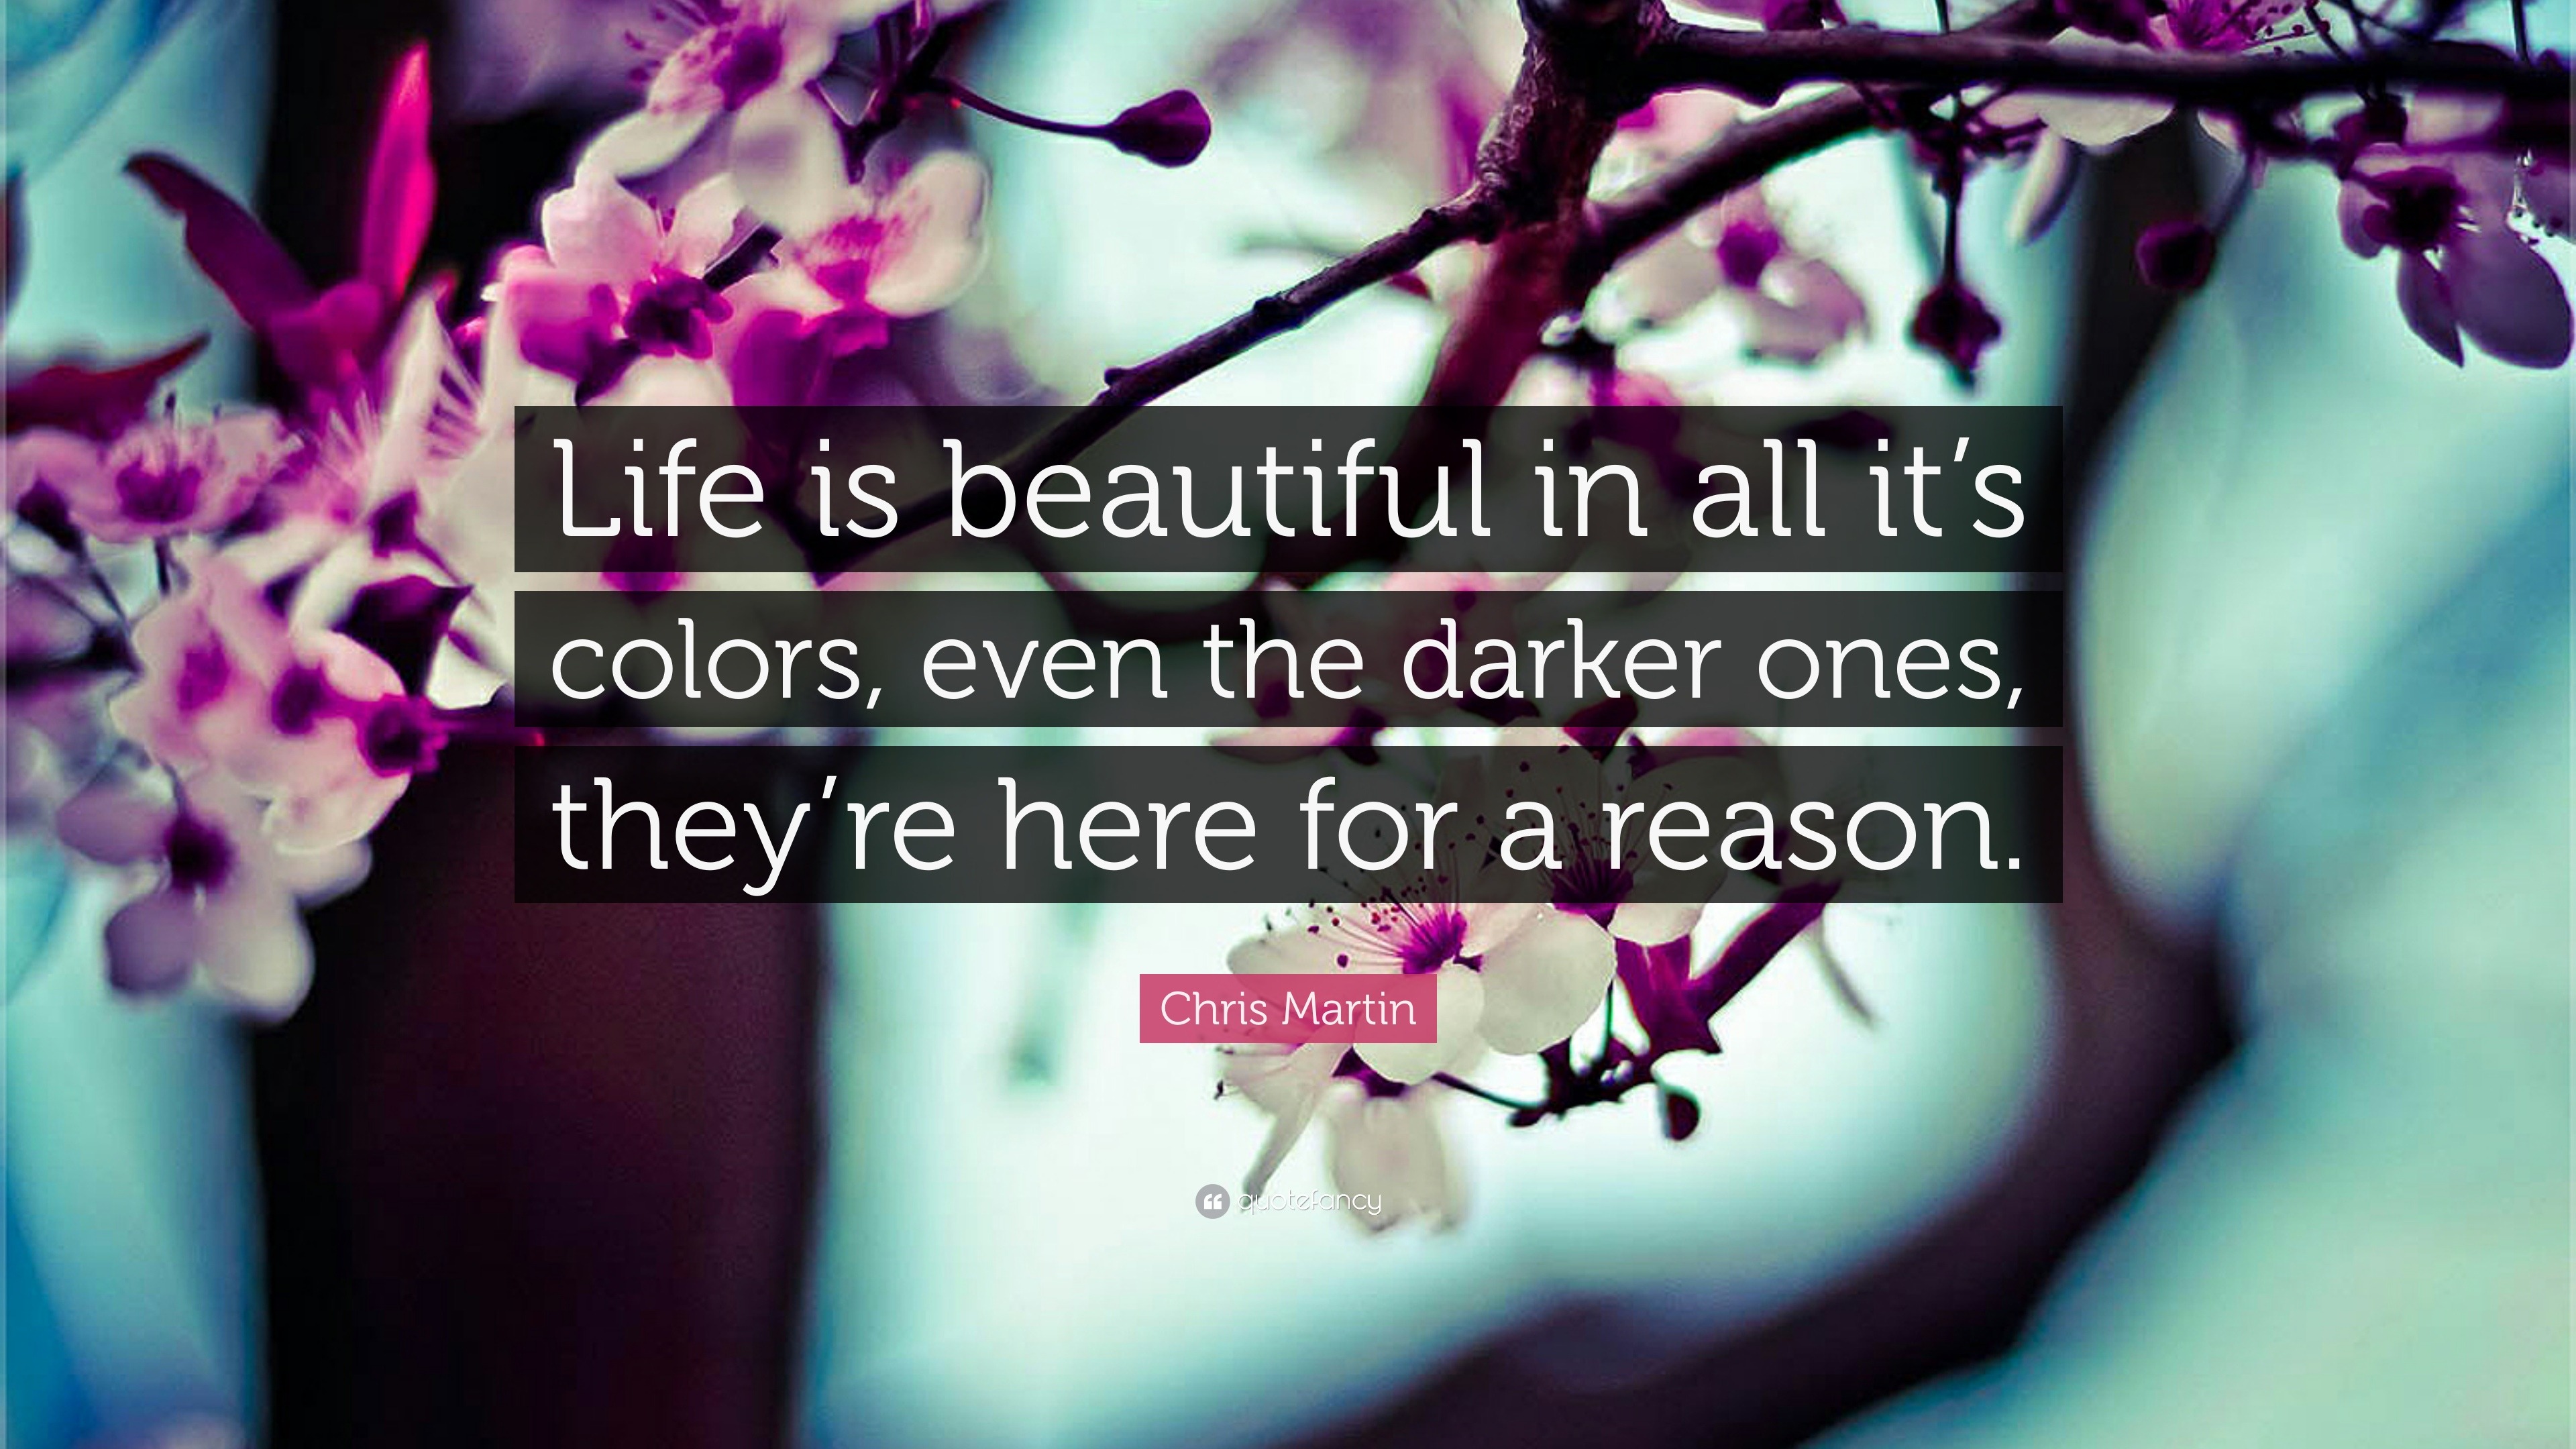 1013529-Chris-Martin-Quote-Life-is-beautiful-in-all-it-s-colors-even-the.jpg